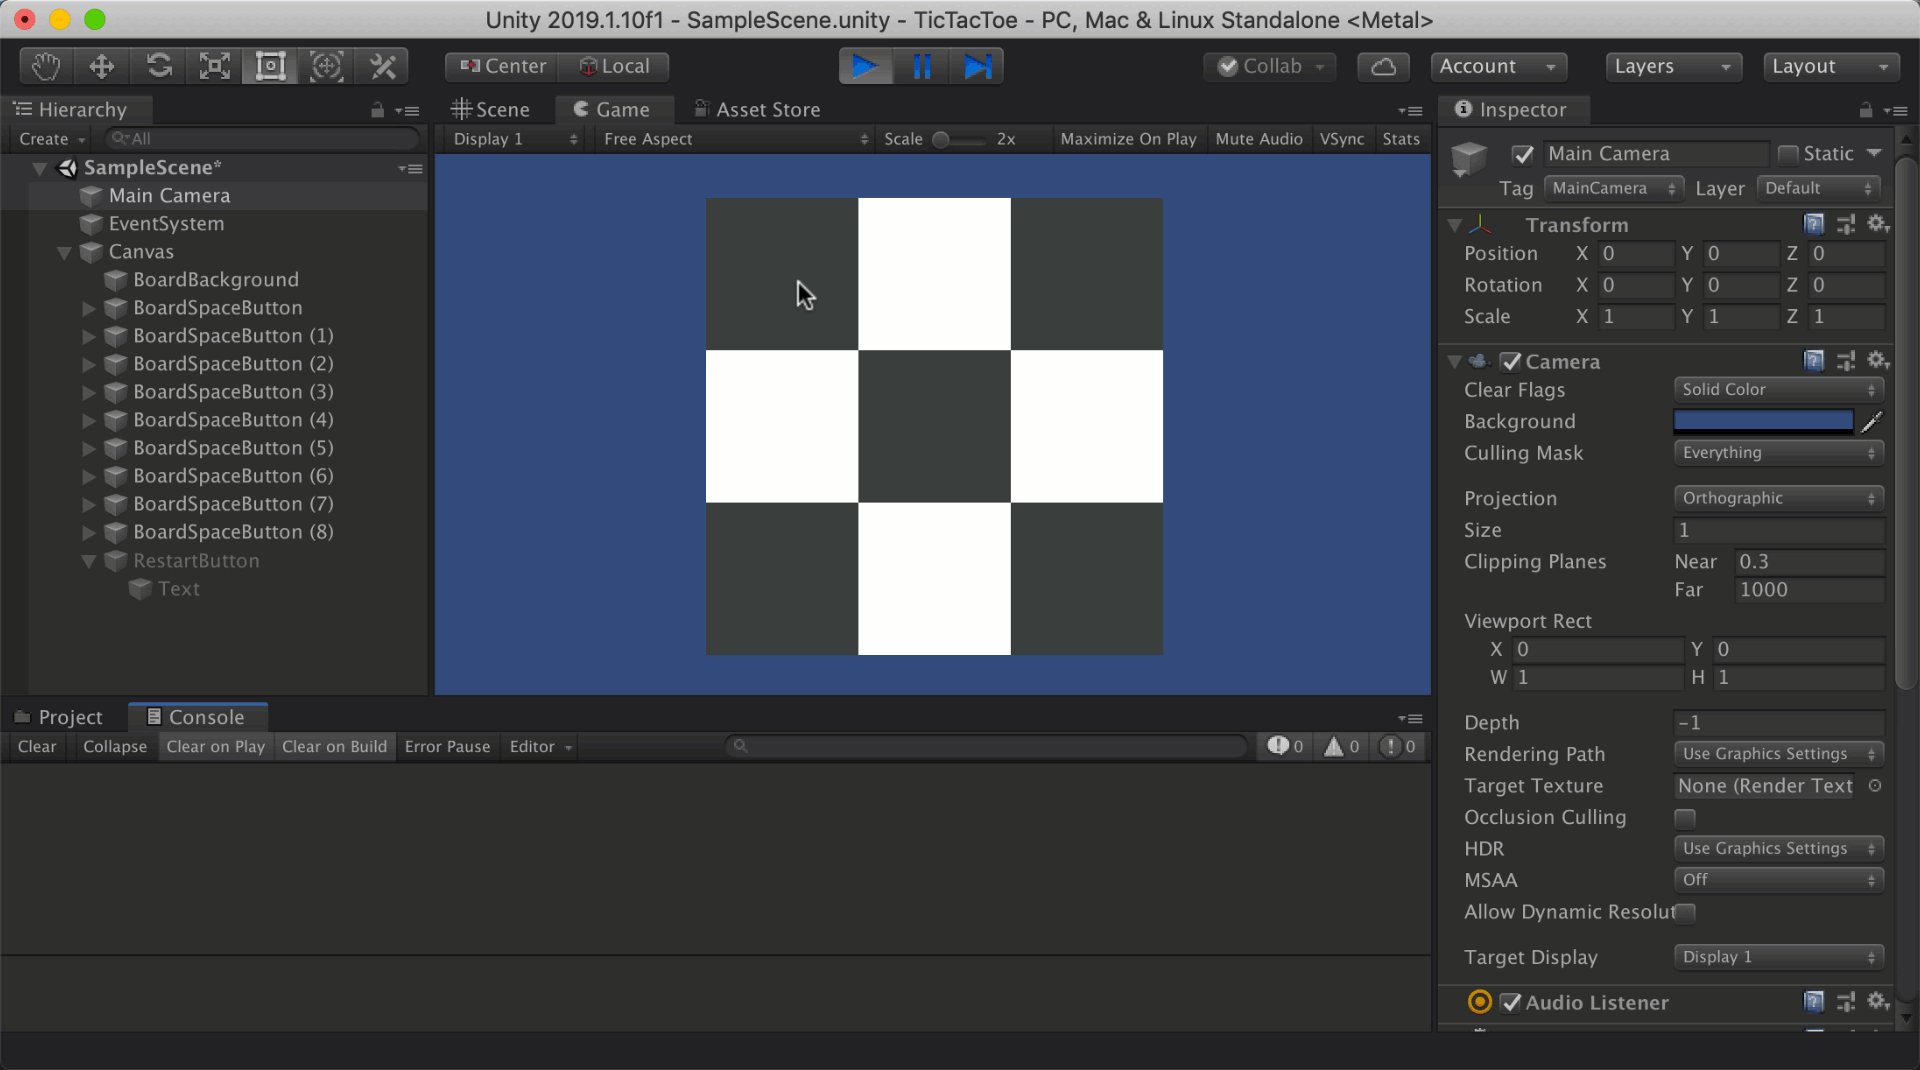 animated image of the tic tac toe game play in the Unity editor